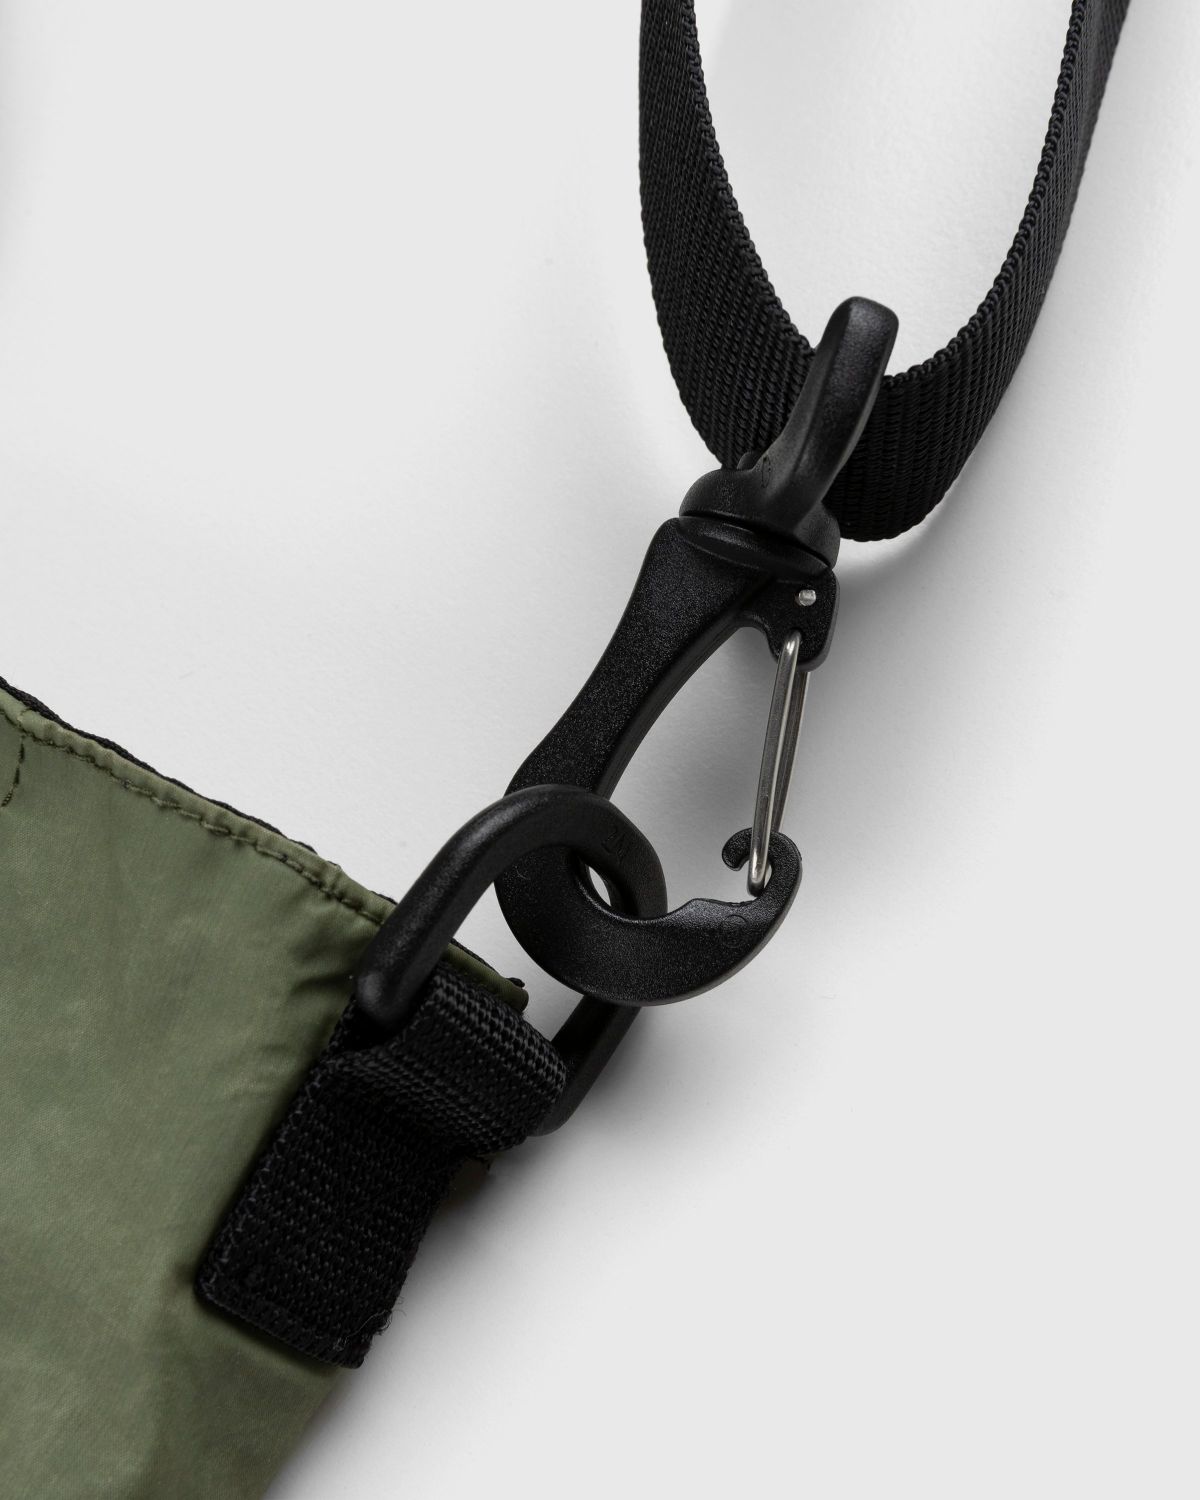 Stone Island – 91475 Garment-Dyed Tote Bag Olive - Bags - Green - Image 3